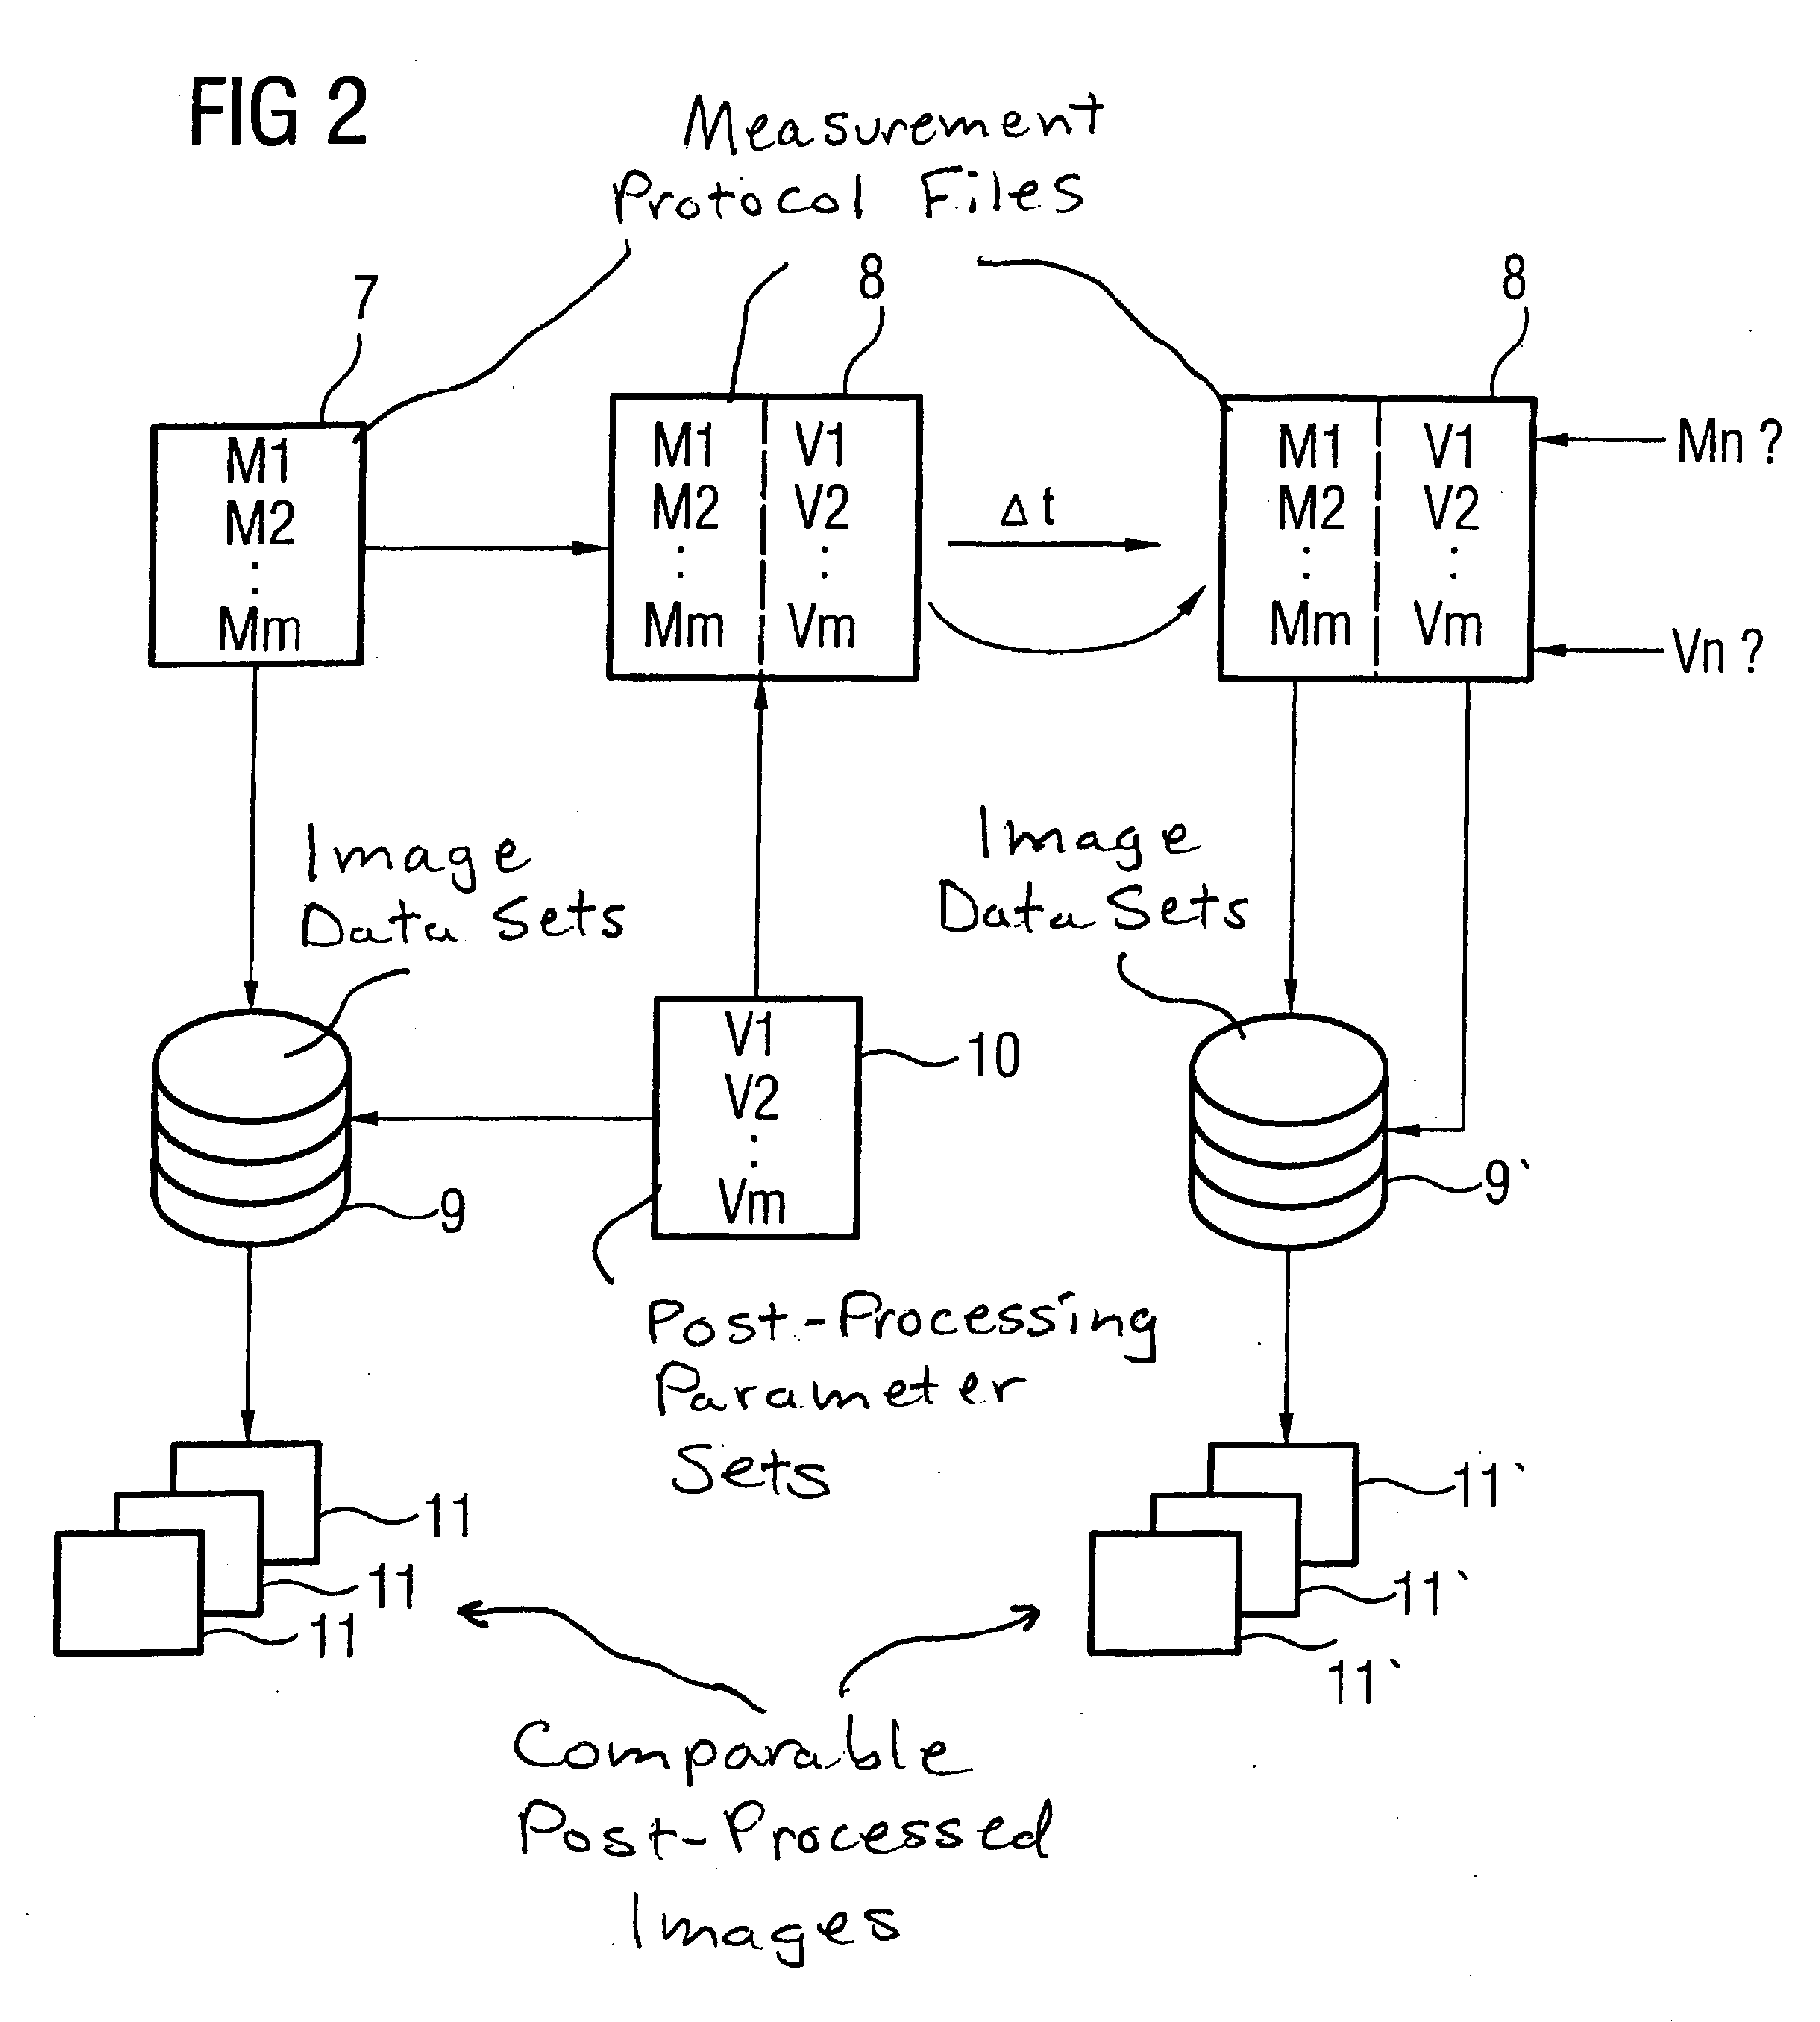 Method to acquire image data sets with a magnetic resonance apparatus